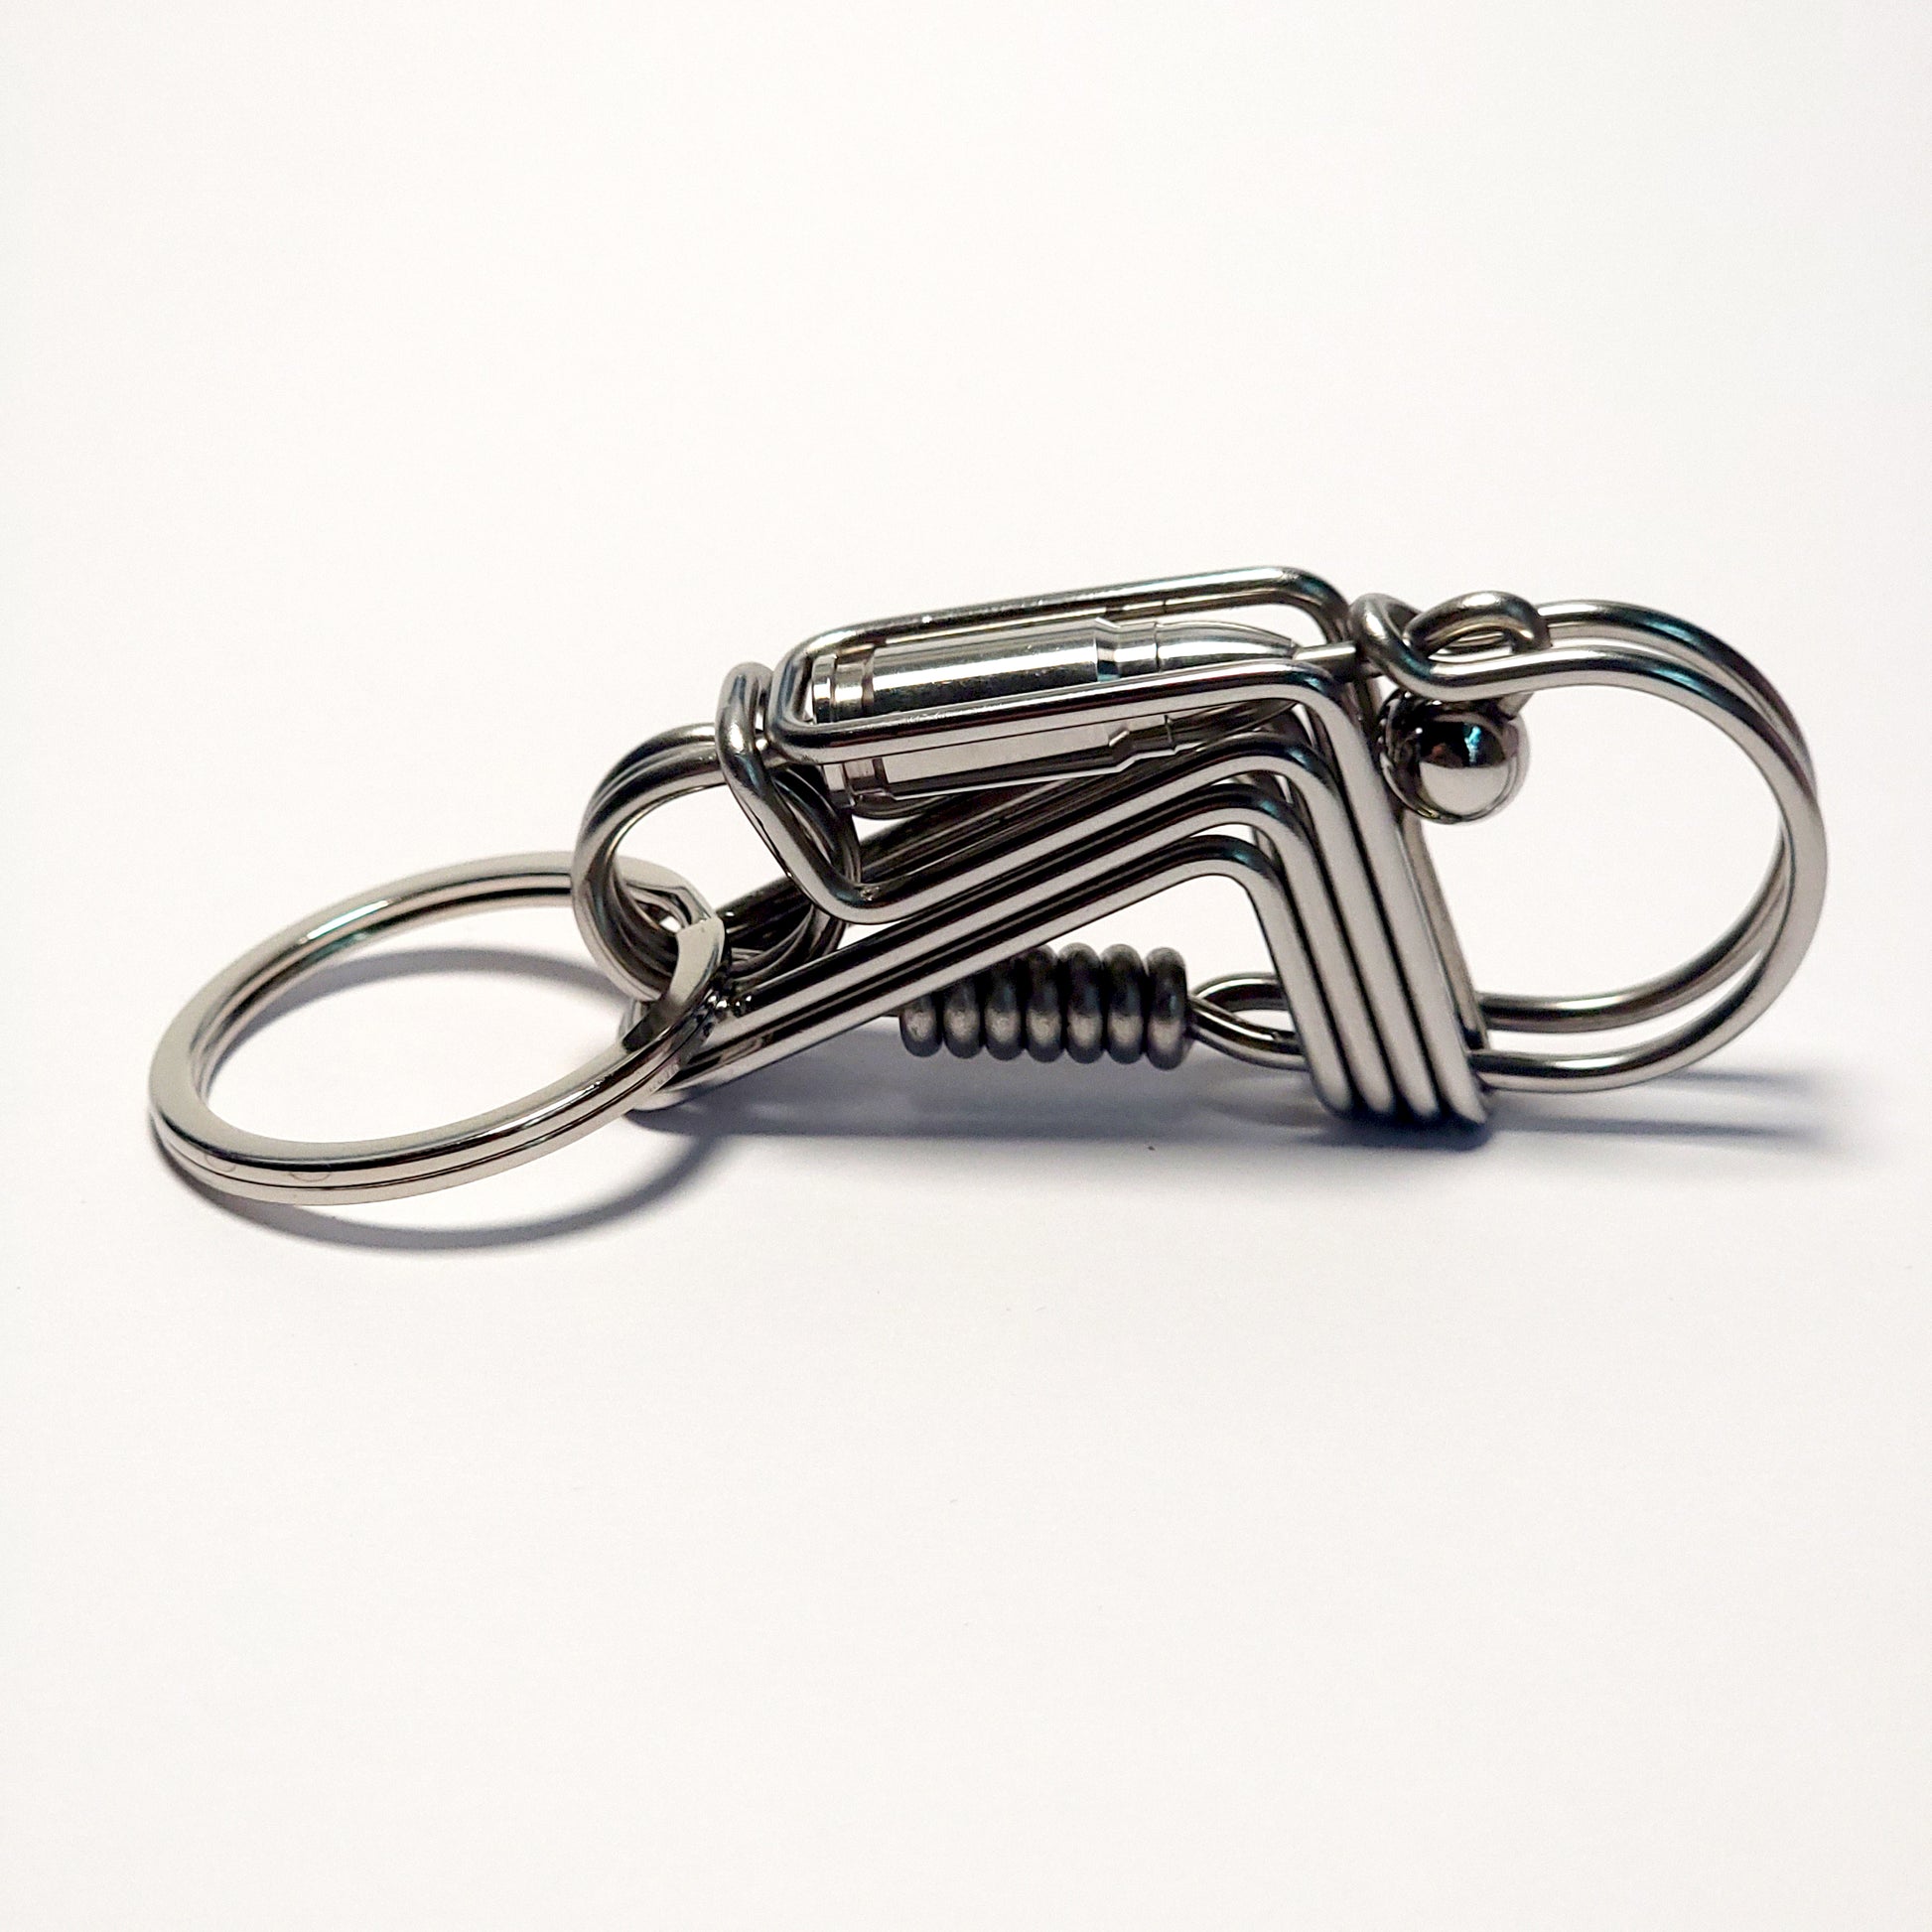 Creative bullet style wire keychain